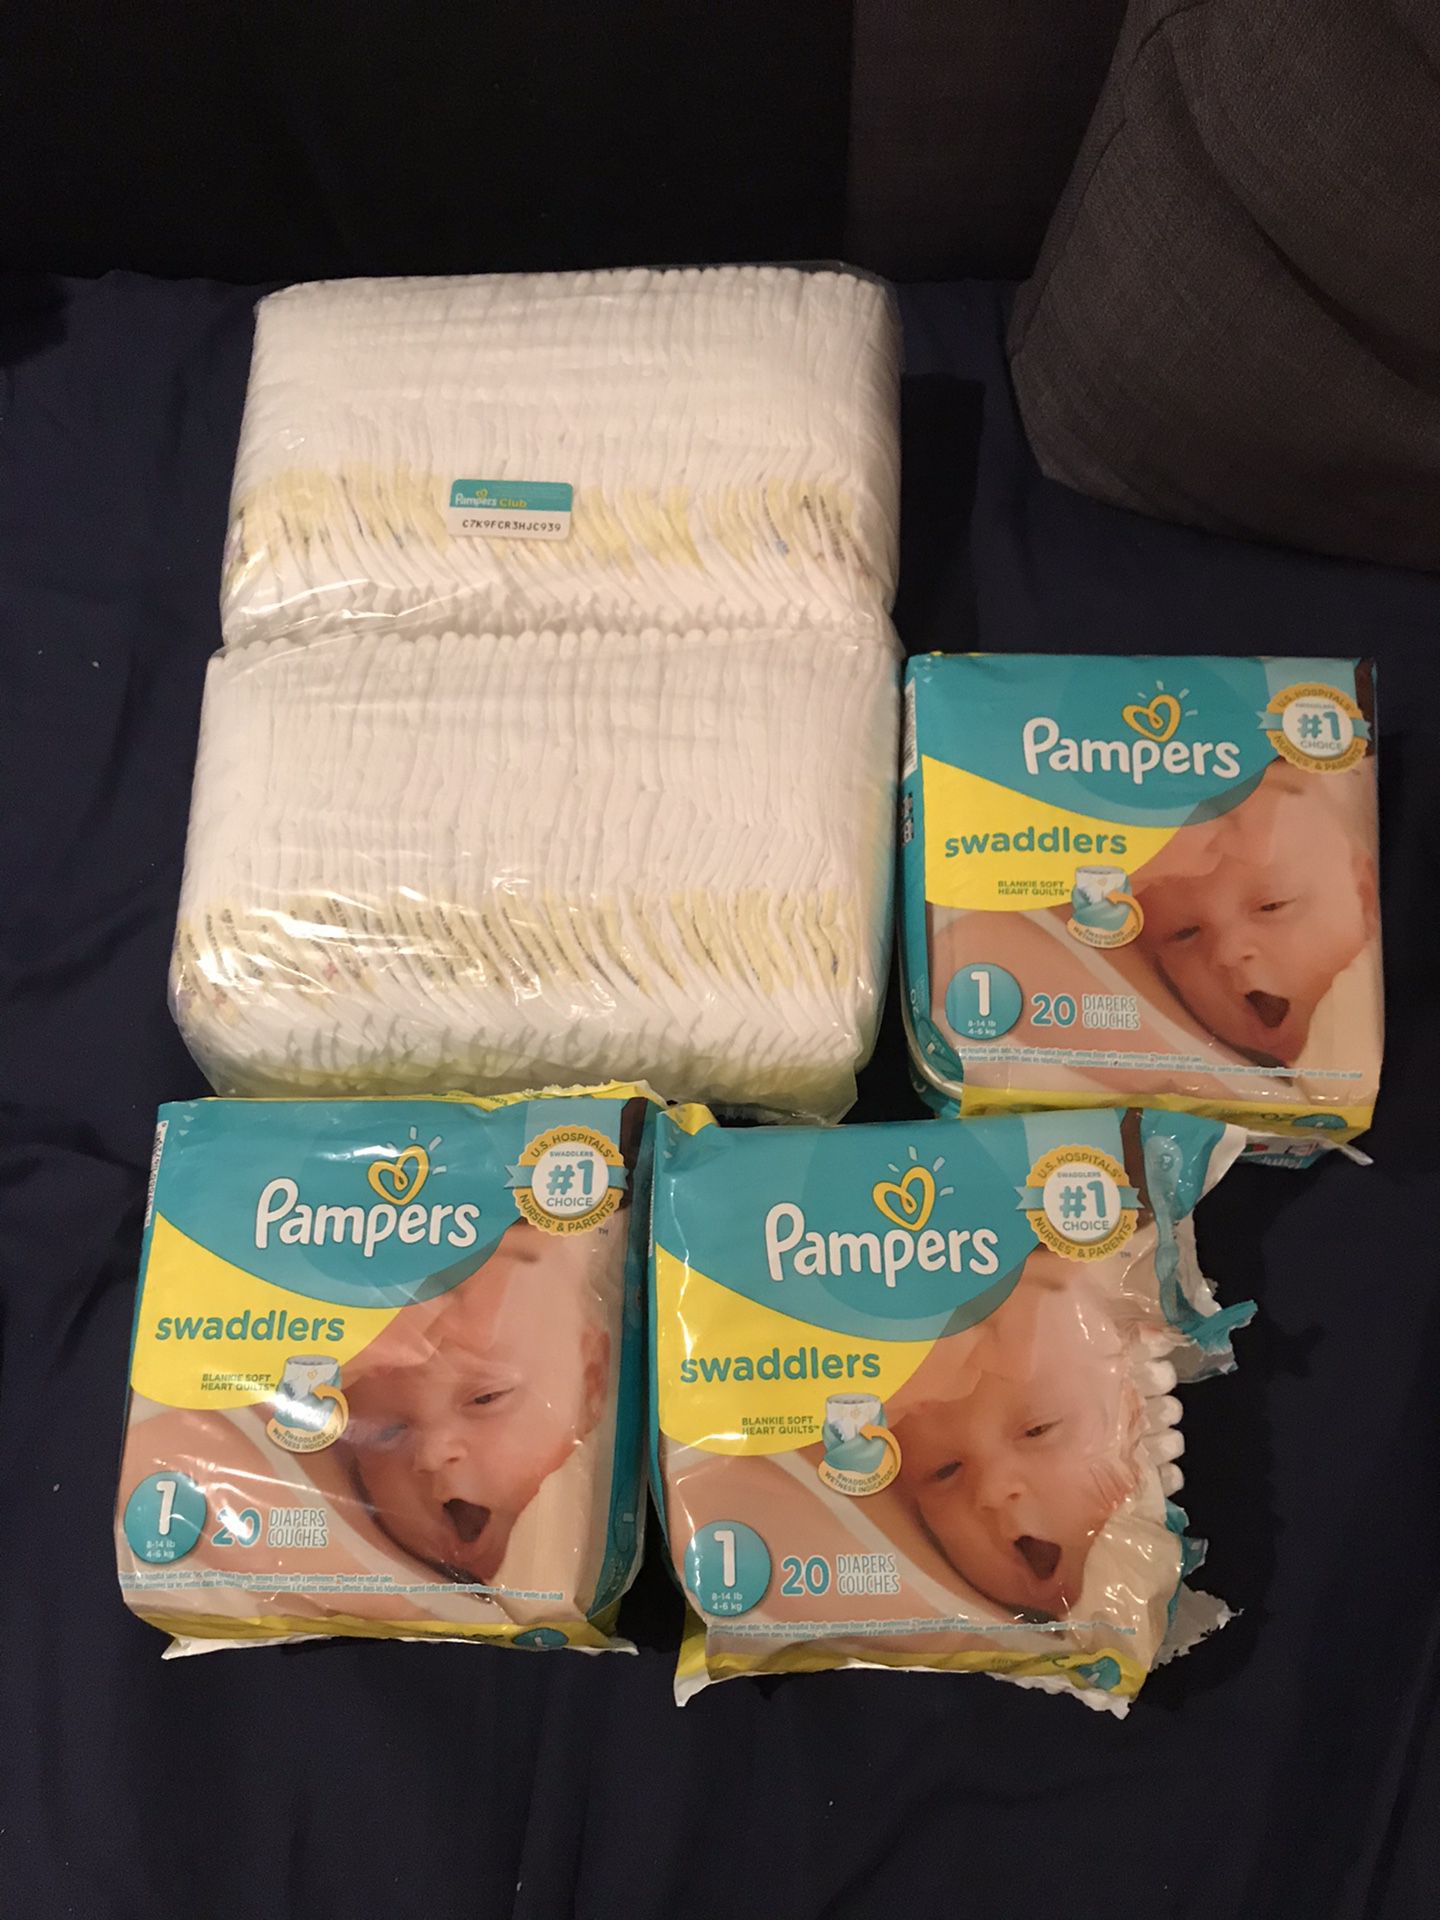 Pampers swaddlers size 1 (120 diapers)